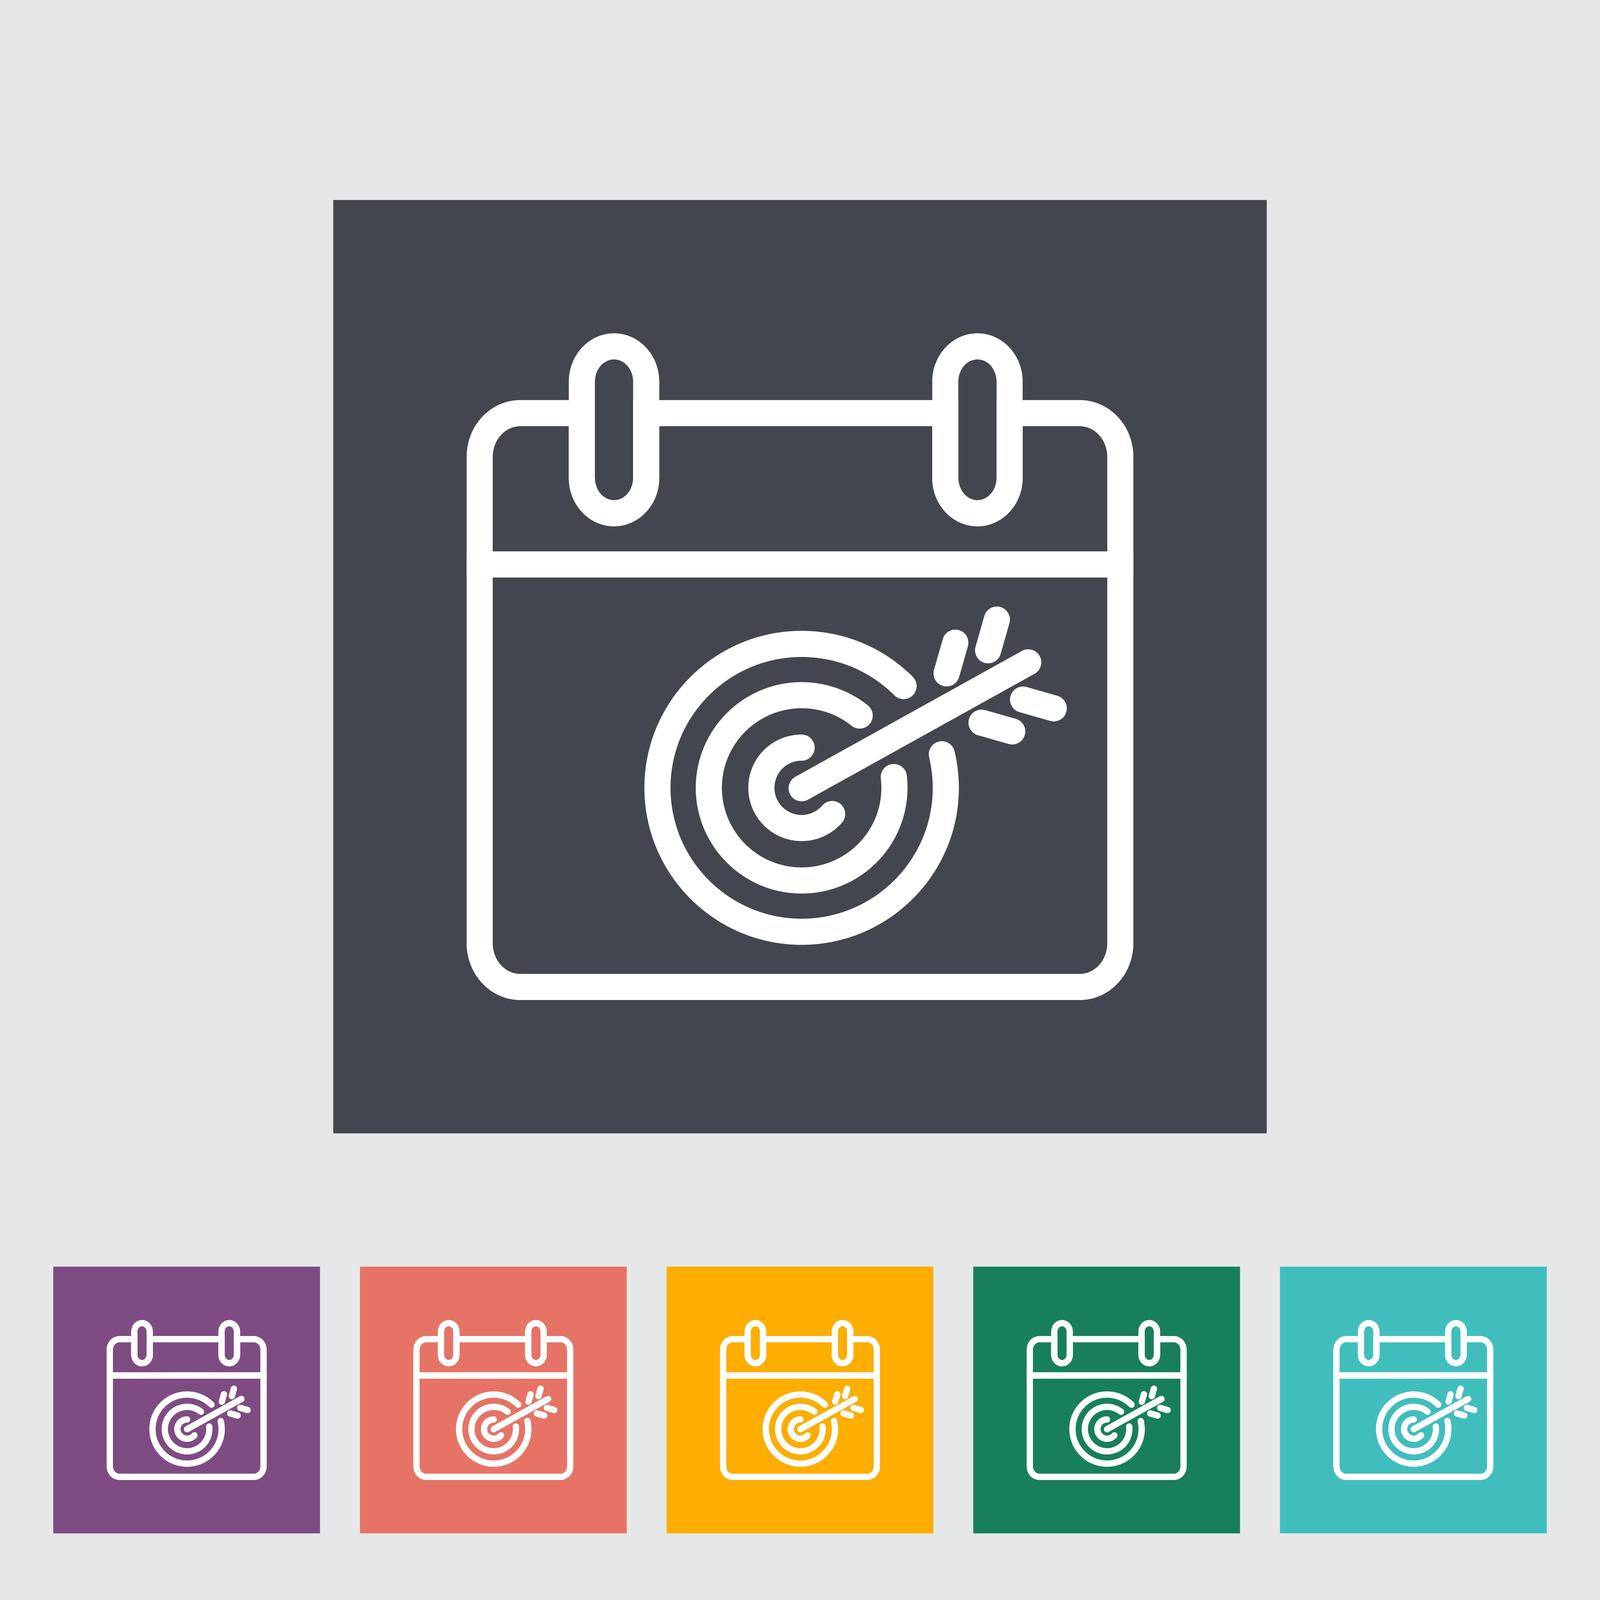 Calendar with goal. Single flat icon on the button. Vector illustration.